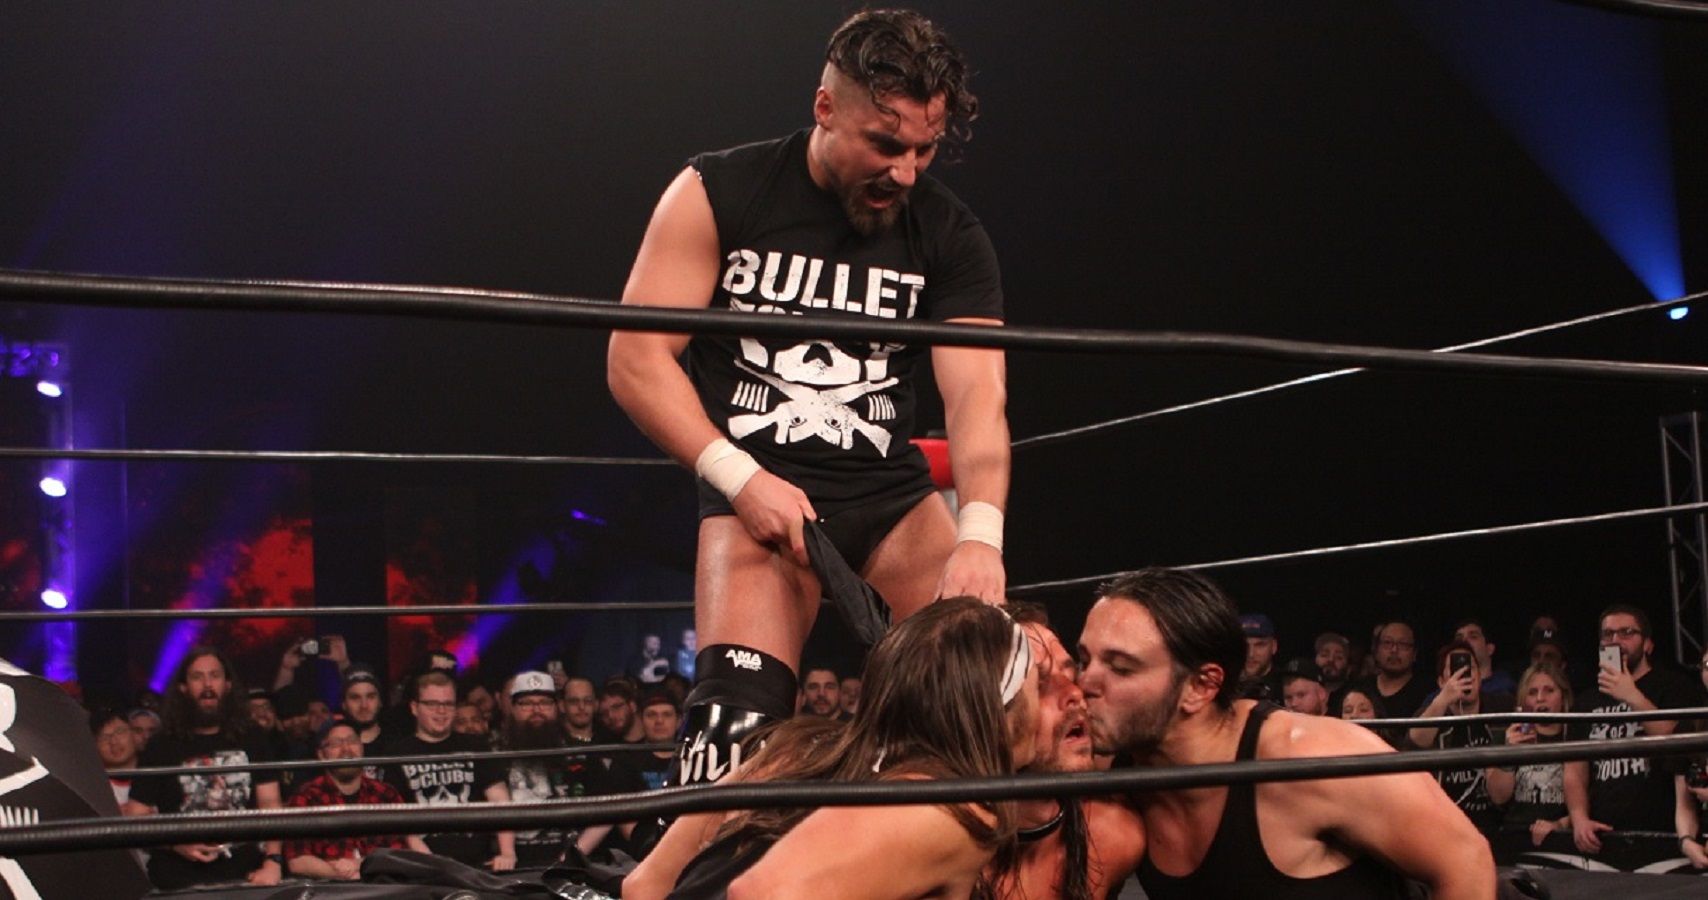 5 Times The Bullet Club Acted Like Babyfaces (& Their 5 Most Heelish Acts)